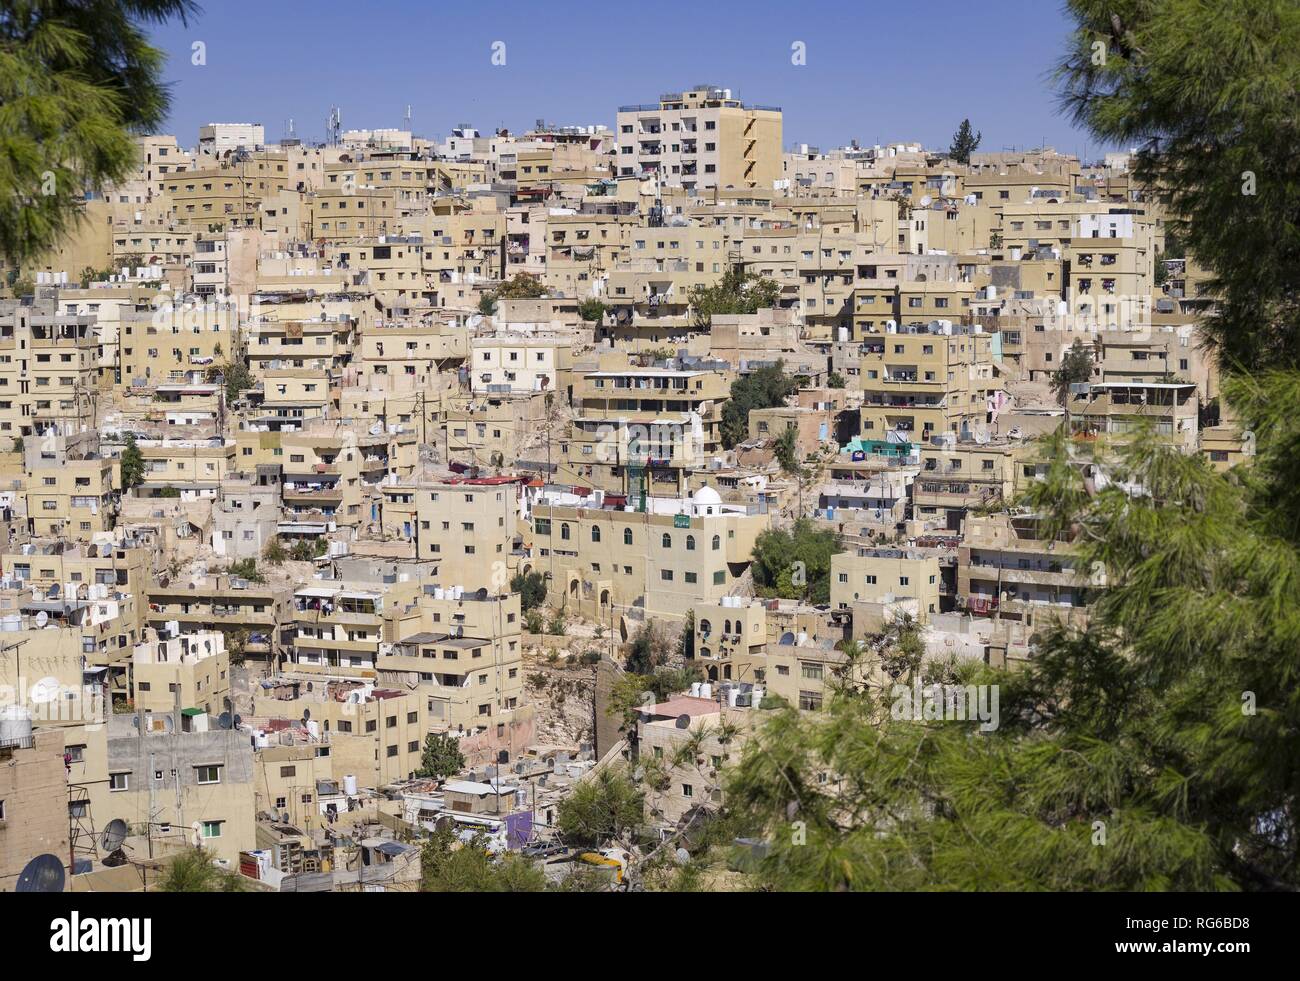 præsentation færge hektar View to the old town of the Jordanian capital Amman. More than 1.8 million people  live in Amman, many of them refugees. (02 November 2018) | usage worldwide  Stock Photo - Alamy